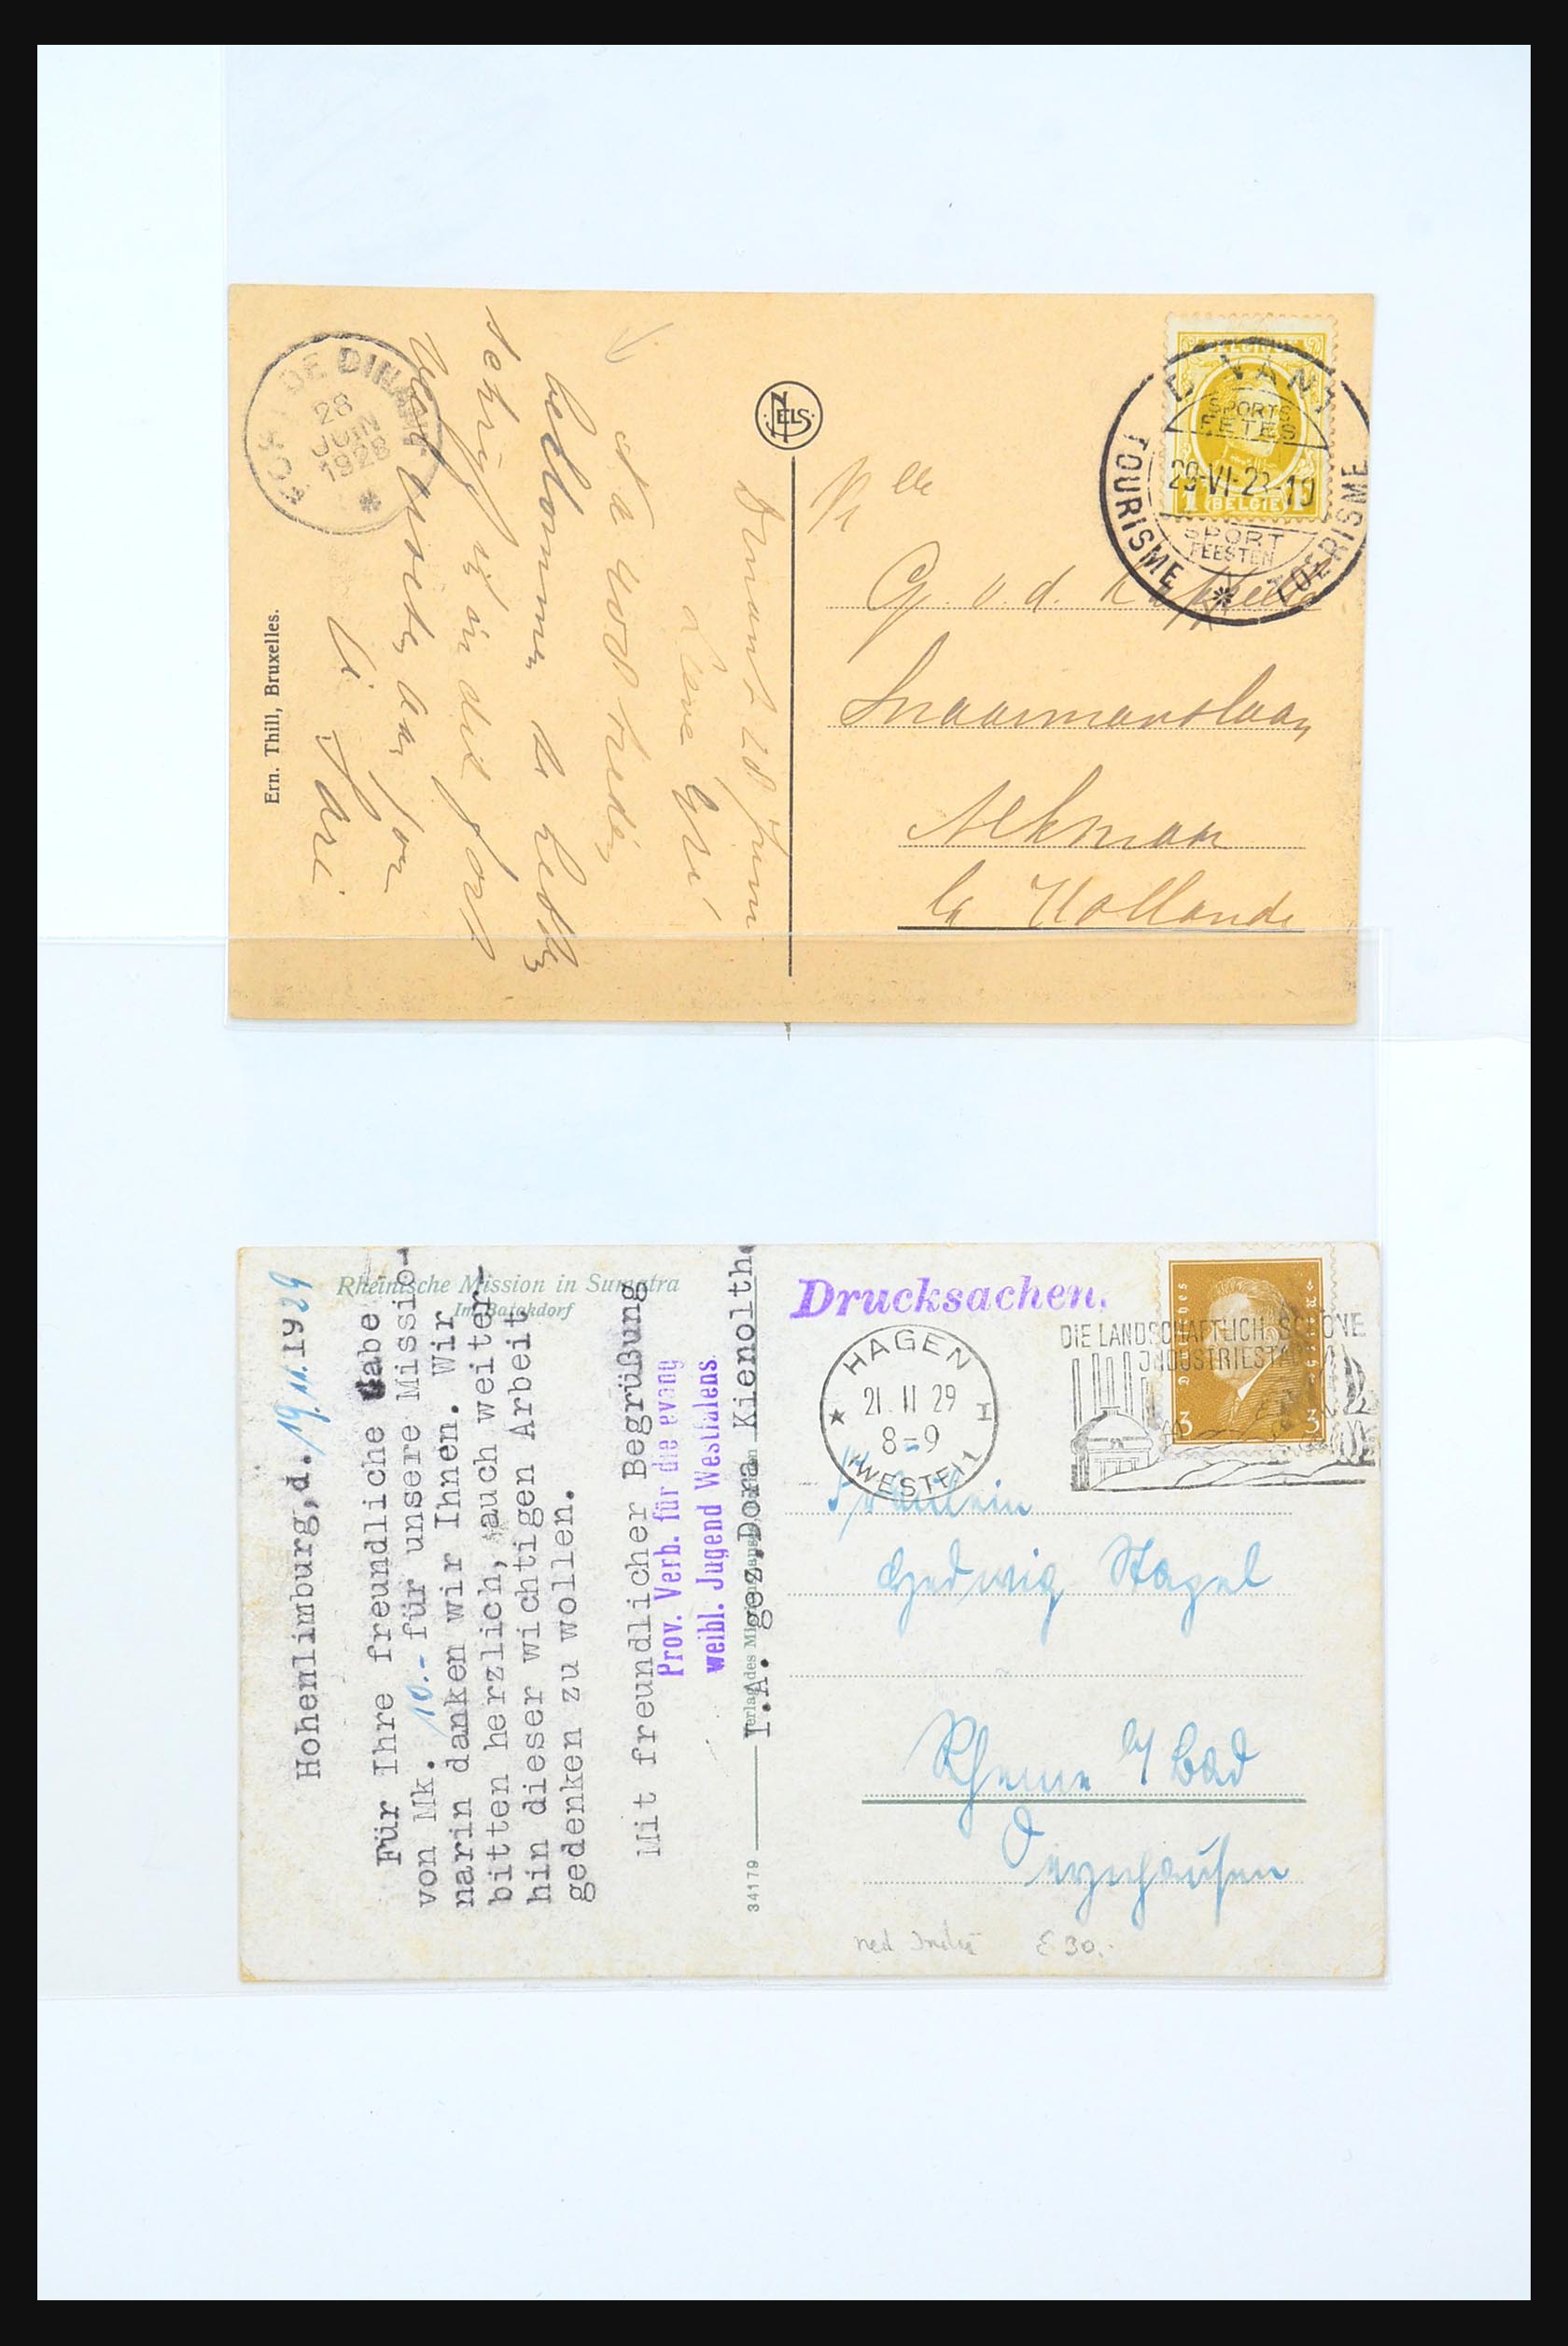 31356 475 - 31356 Belgium and Colonies covers 1850-1960.